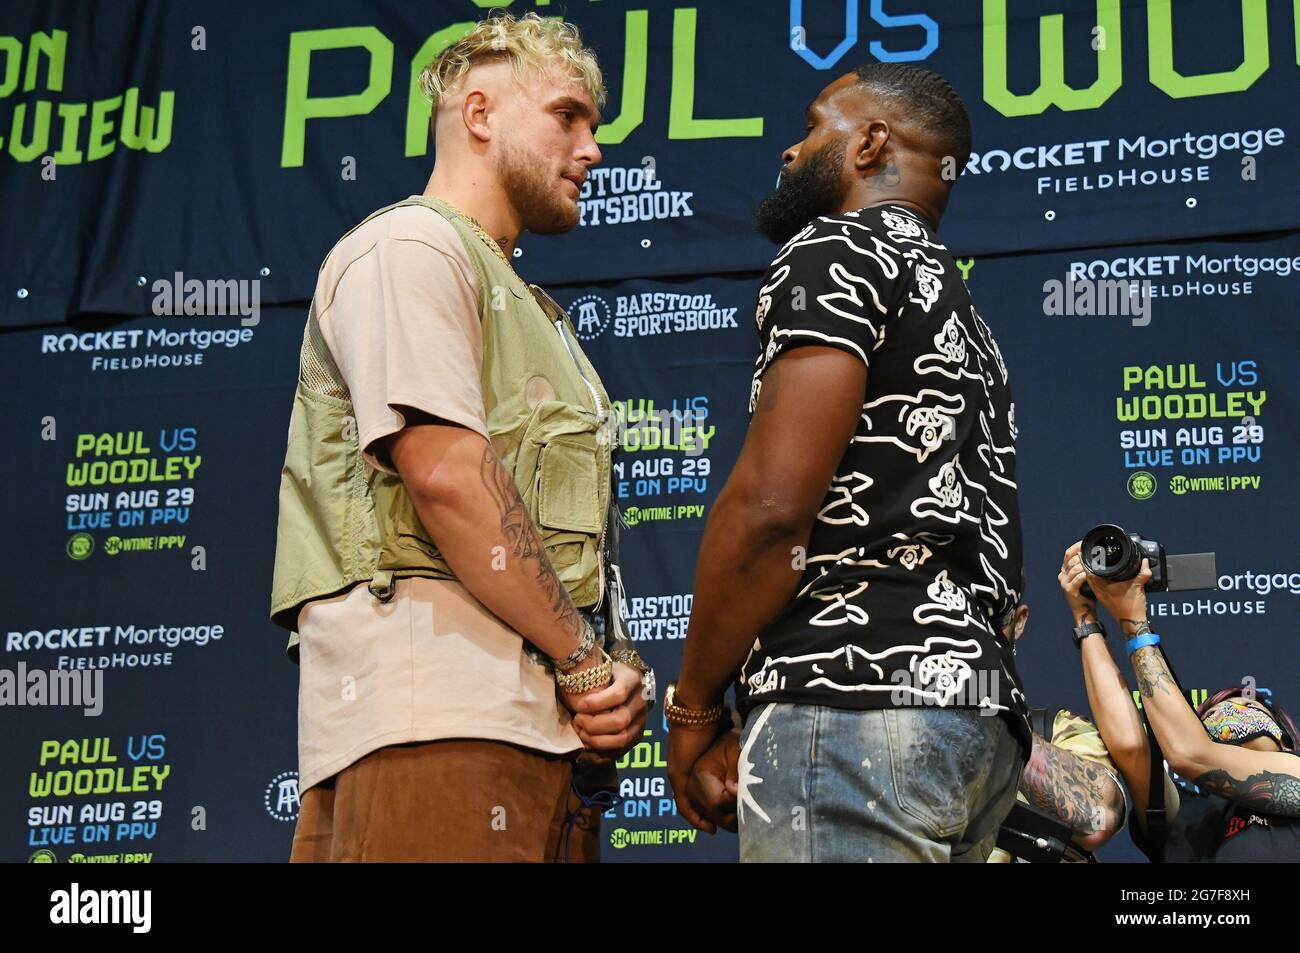 Los Angeles, USA. 13th July, 2021. (L-R) Jake Paul and Tyron Woodley at the JAKE PAUL VS. TYRON WOODLEY Los Angeles Press Conference held at The Novo at L.A. LIVE in Los Angeles, CA on Tuesday, ?July 13, 2021. (Photo By Sthanlee B. Mirador/Sipa USA) Credit: Sipa USA/Alamy Live News Stock Photo